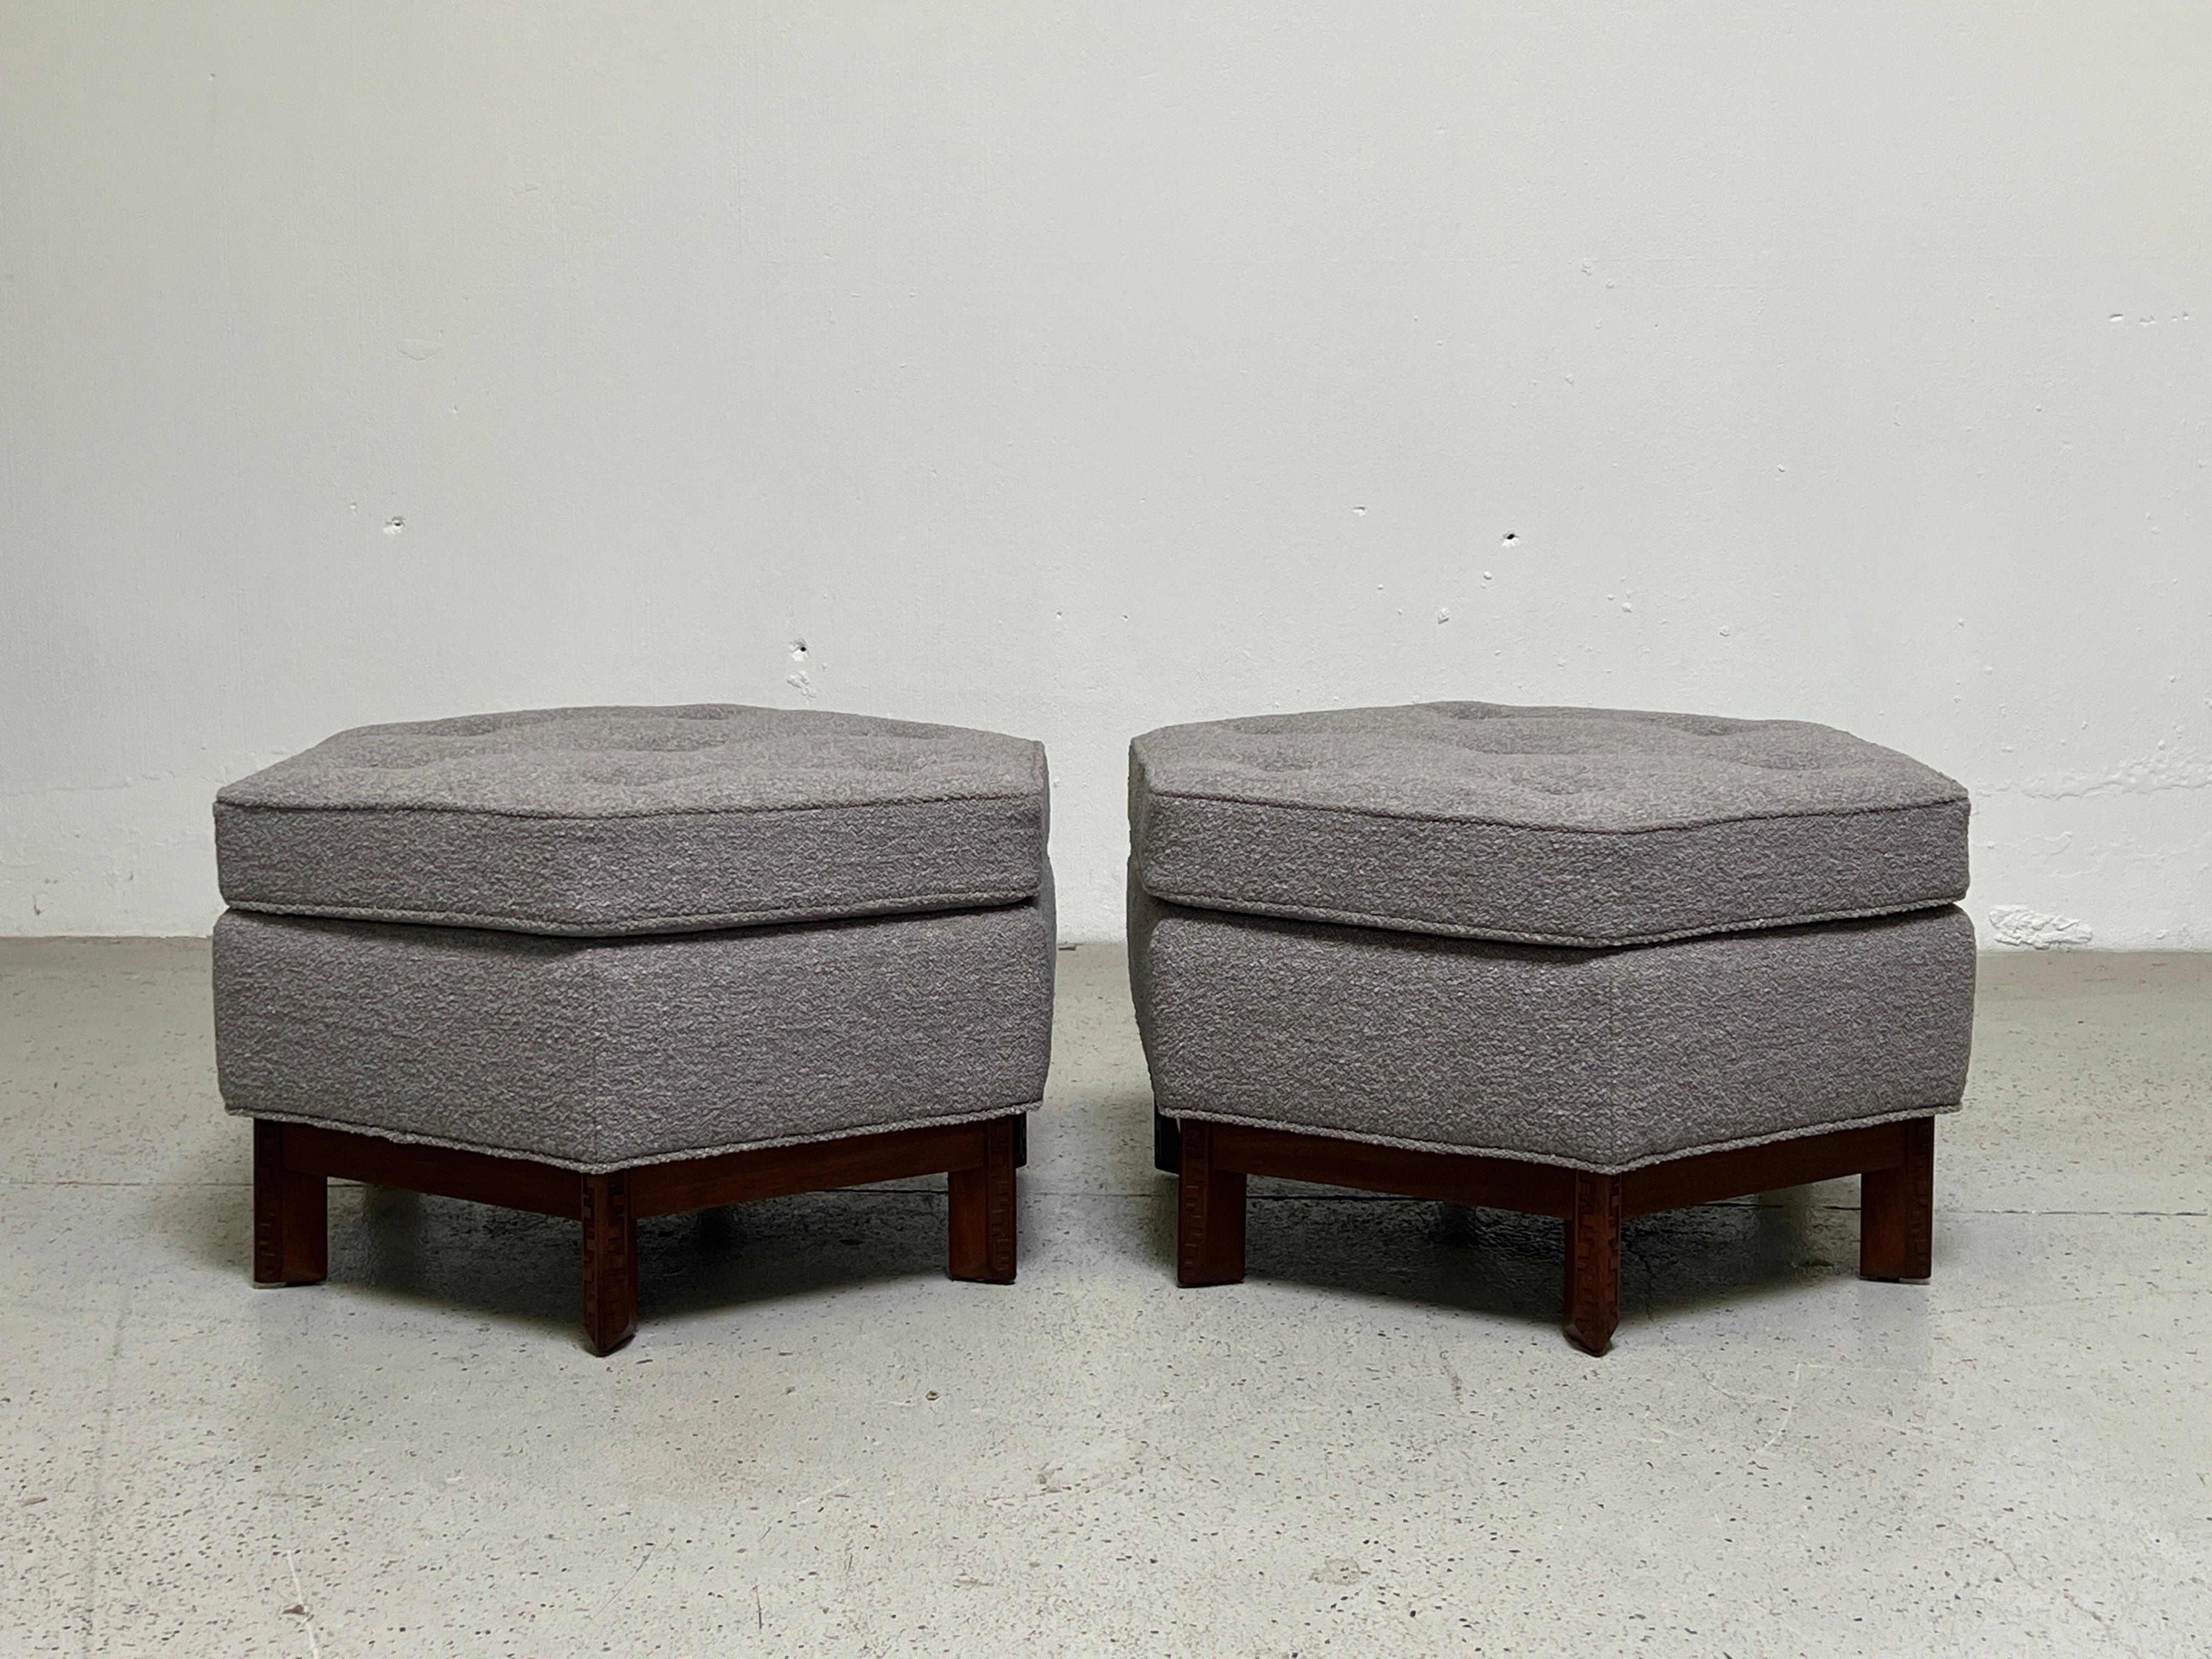 A pair of hexagonal ottomans designed by Frank Lloyd Wright for Henredon. Mahogany bases with carved Taliesin greek key details. Fully restored and upholstered in Designtex / Lambert / Smoke.